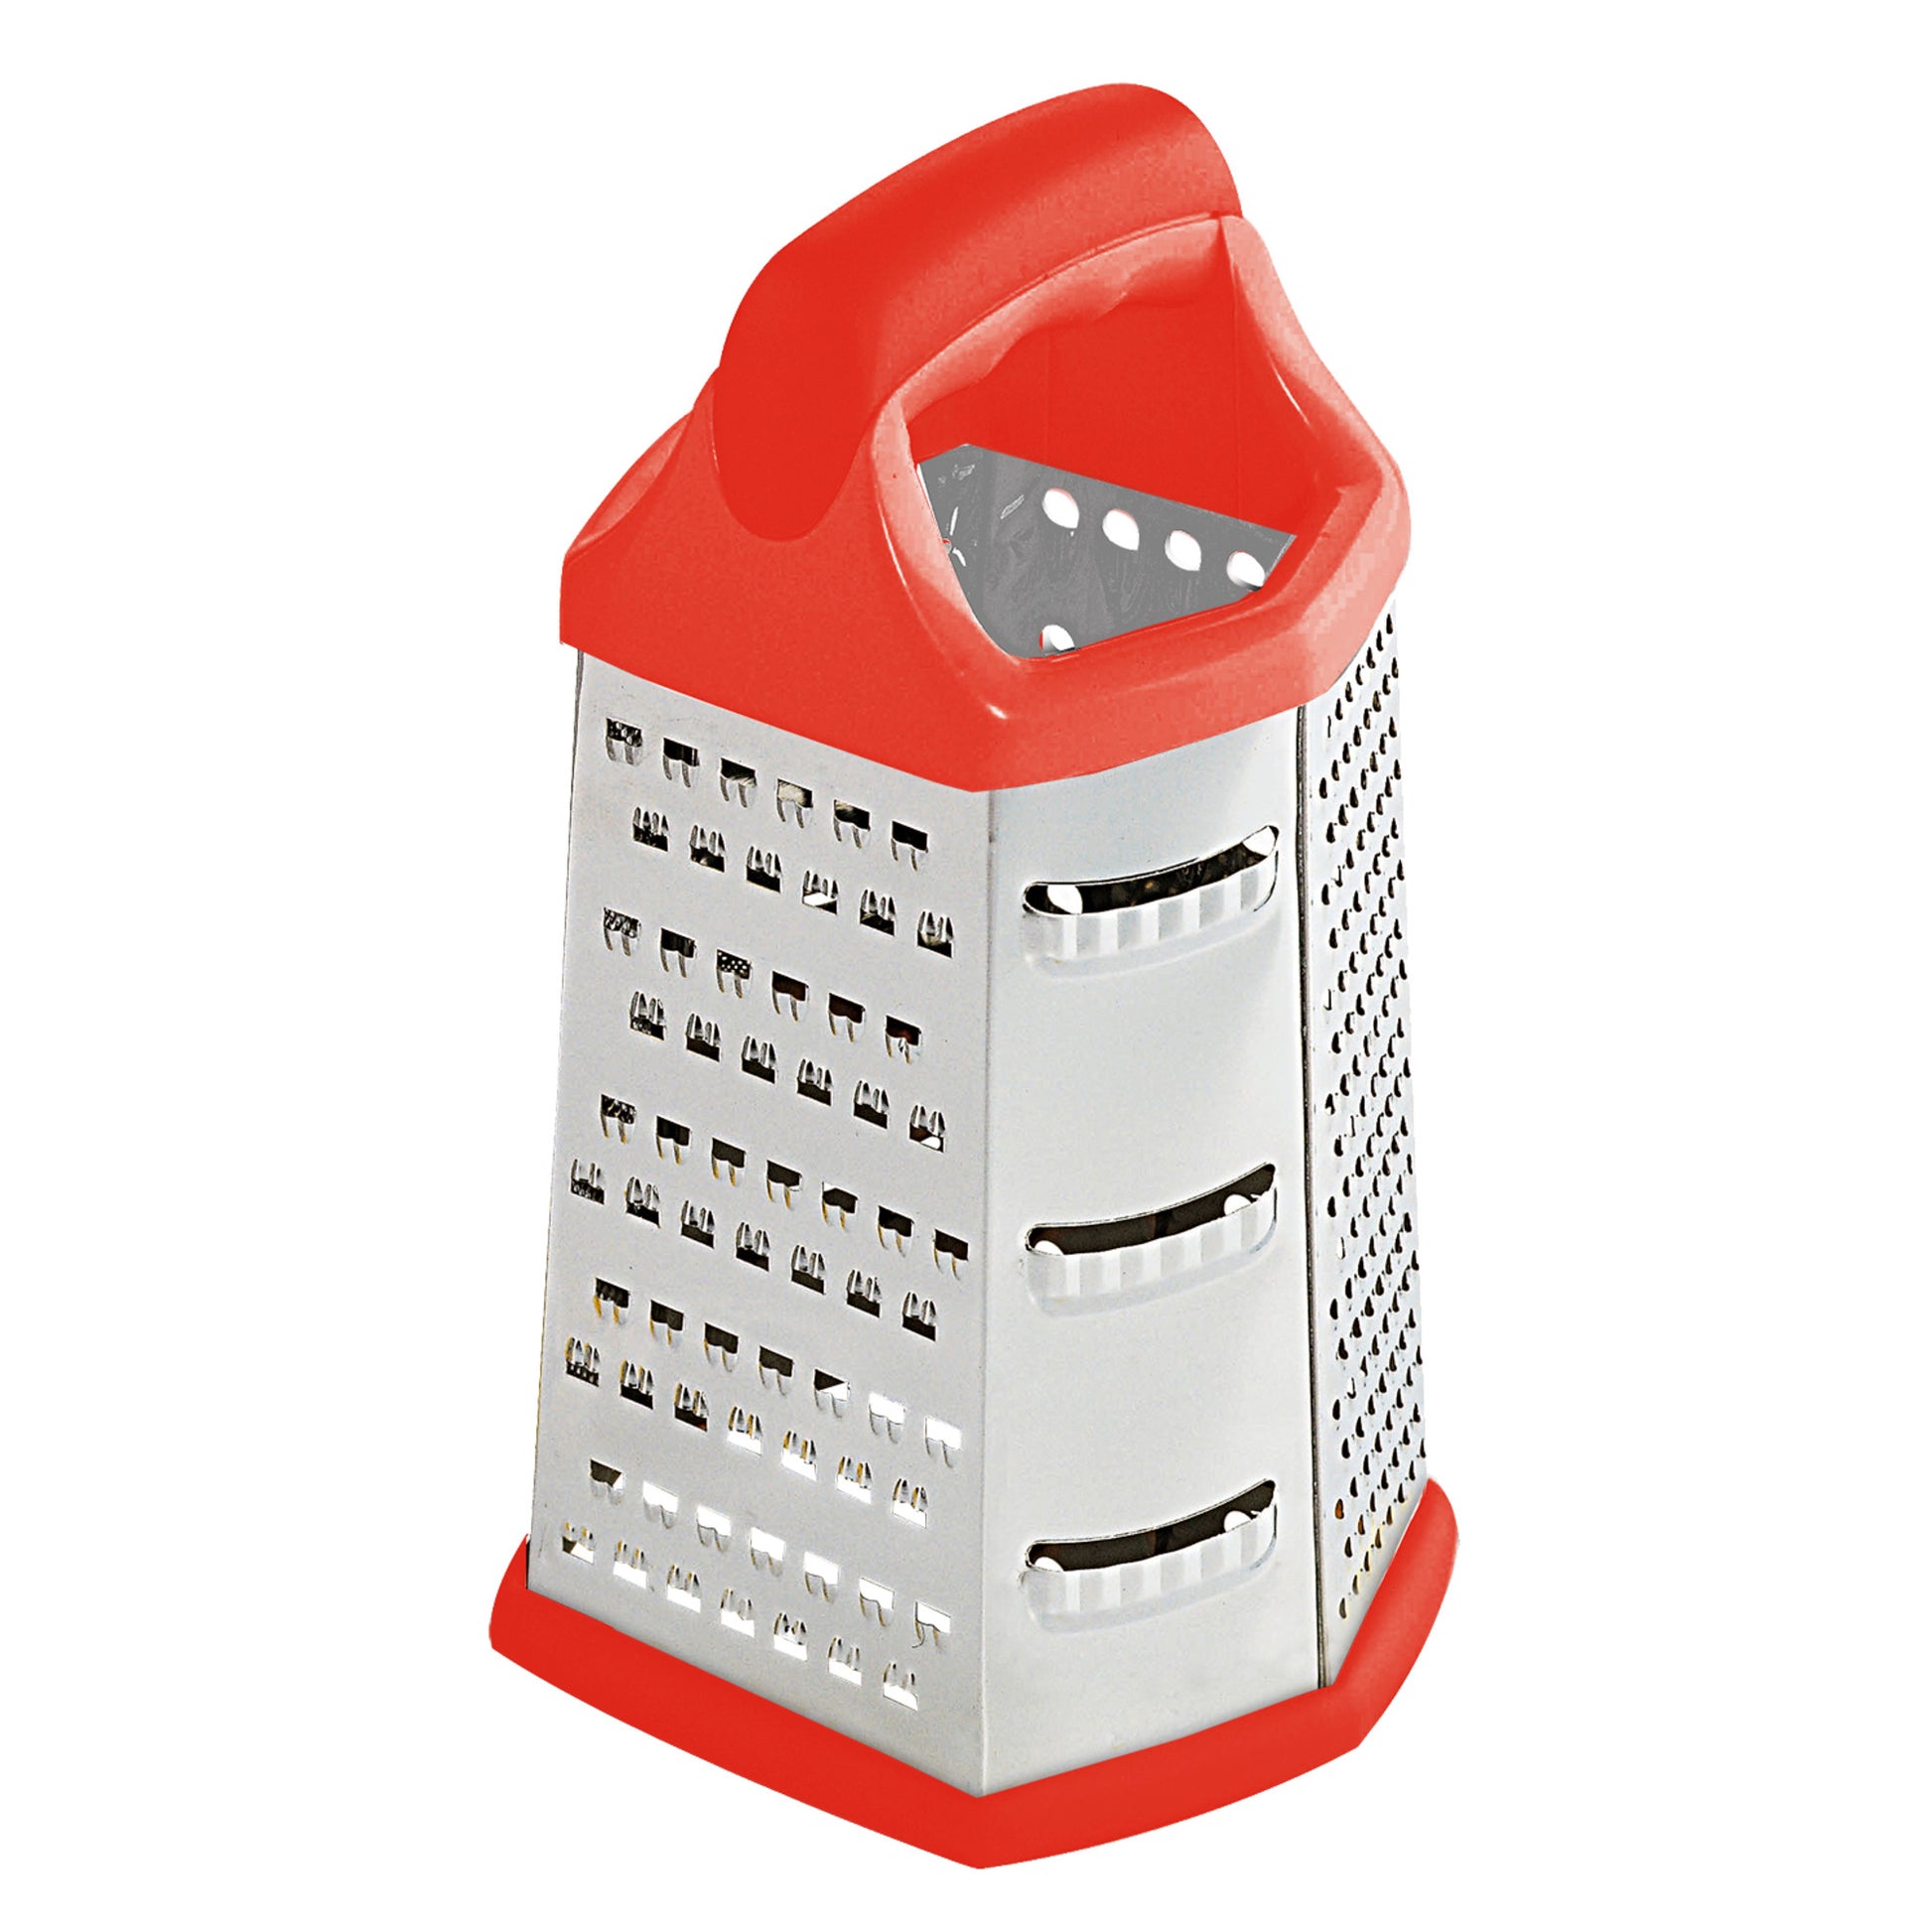 Home Basics Heavy Weight 6 Sided Stainless Steel Cheese Grater